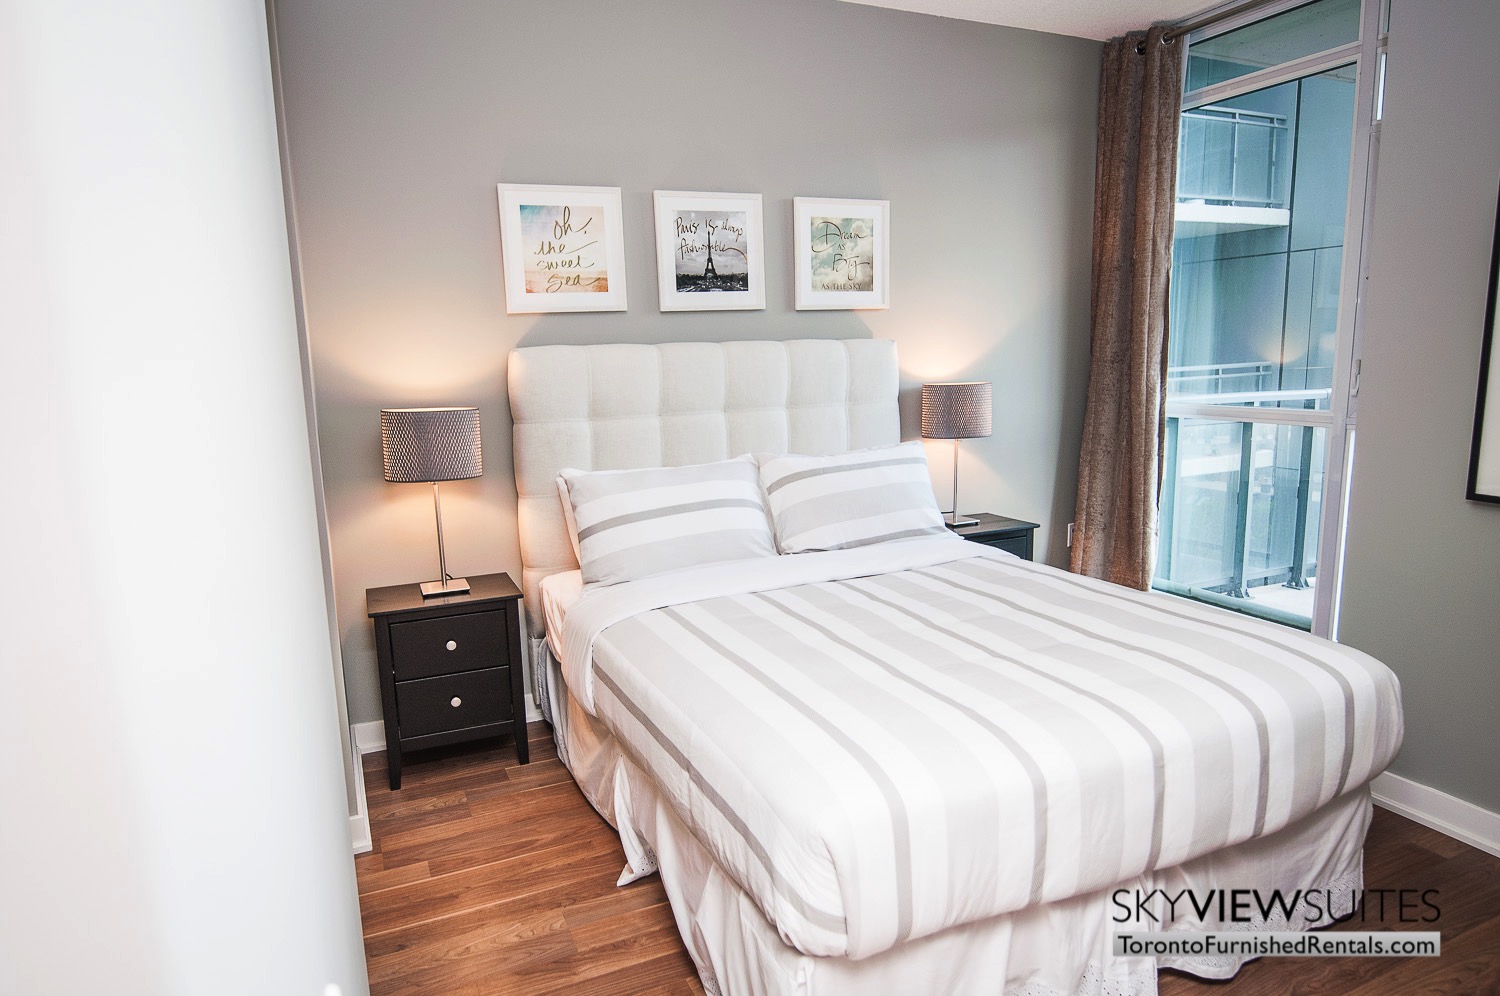 King west corporate rentals toronto white bedsheets